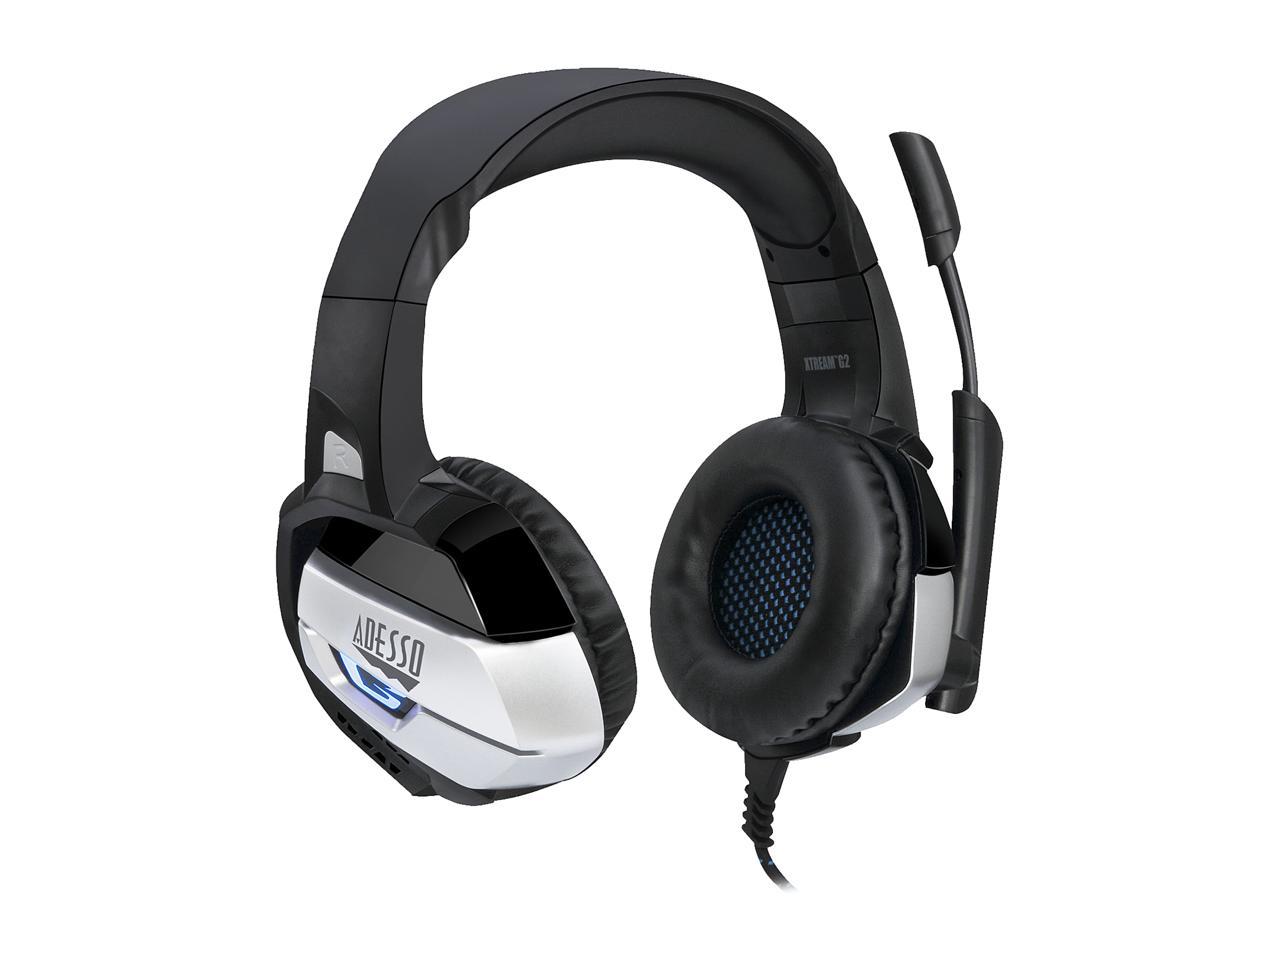 Adesso Xtream G2 Stereo USB Gaming Headphone/Headset with Microphone